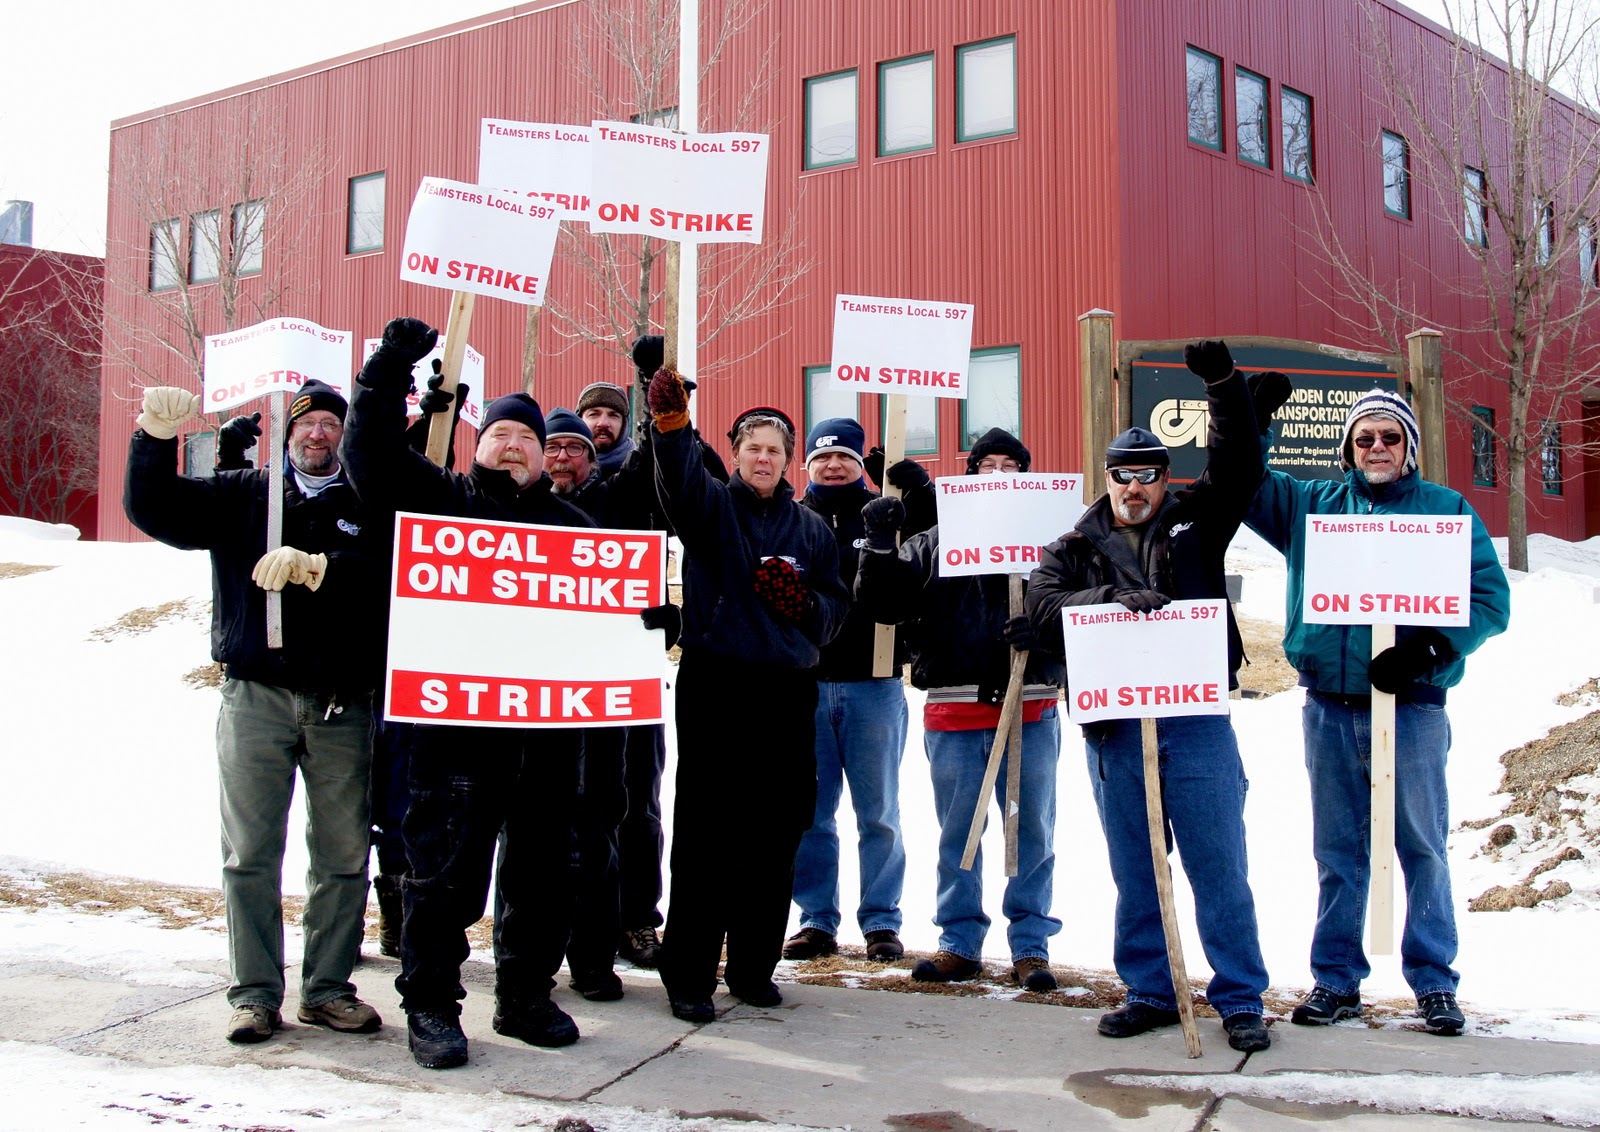 Striking C C T A drivers (Teamsters Local 597) on the first day of their strike, March 17 2014.